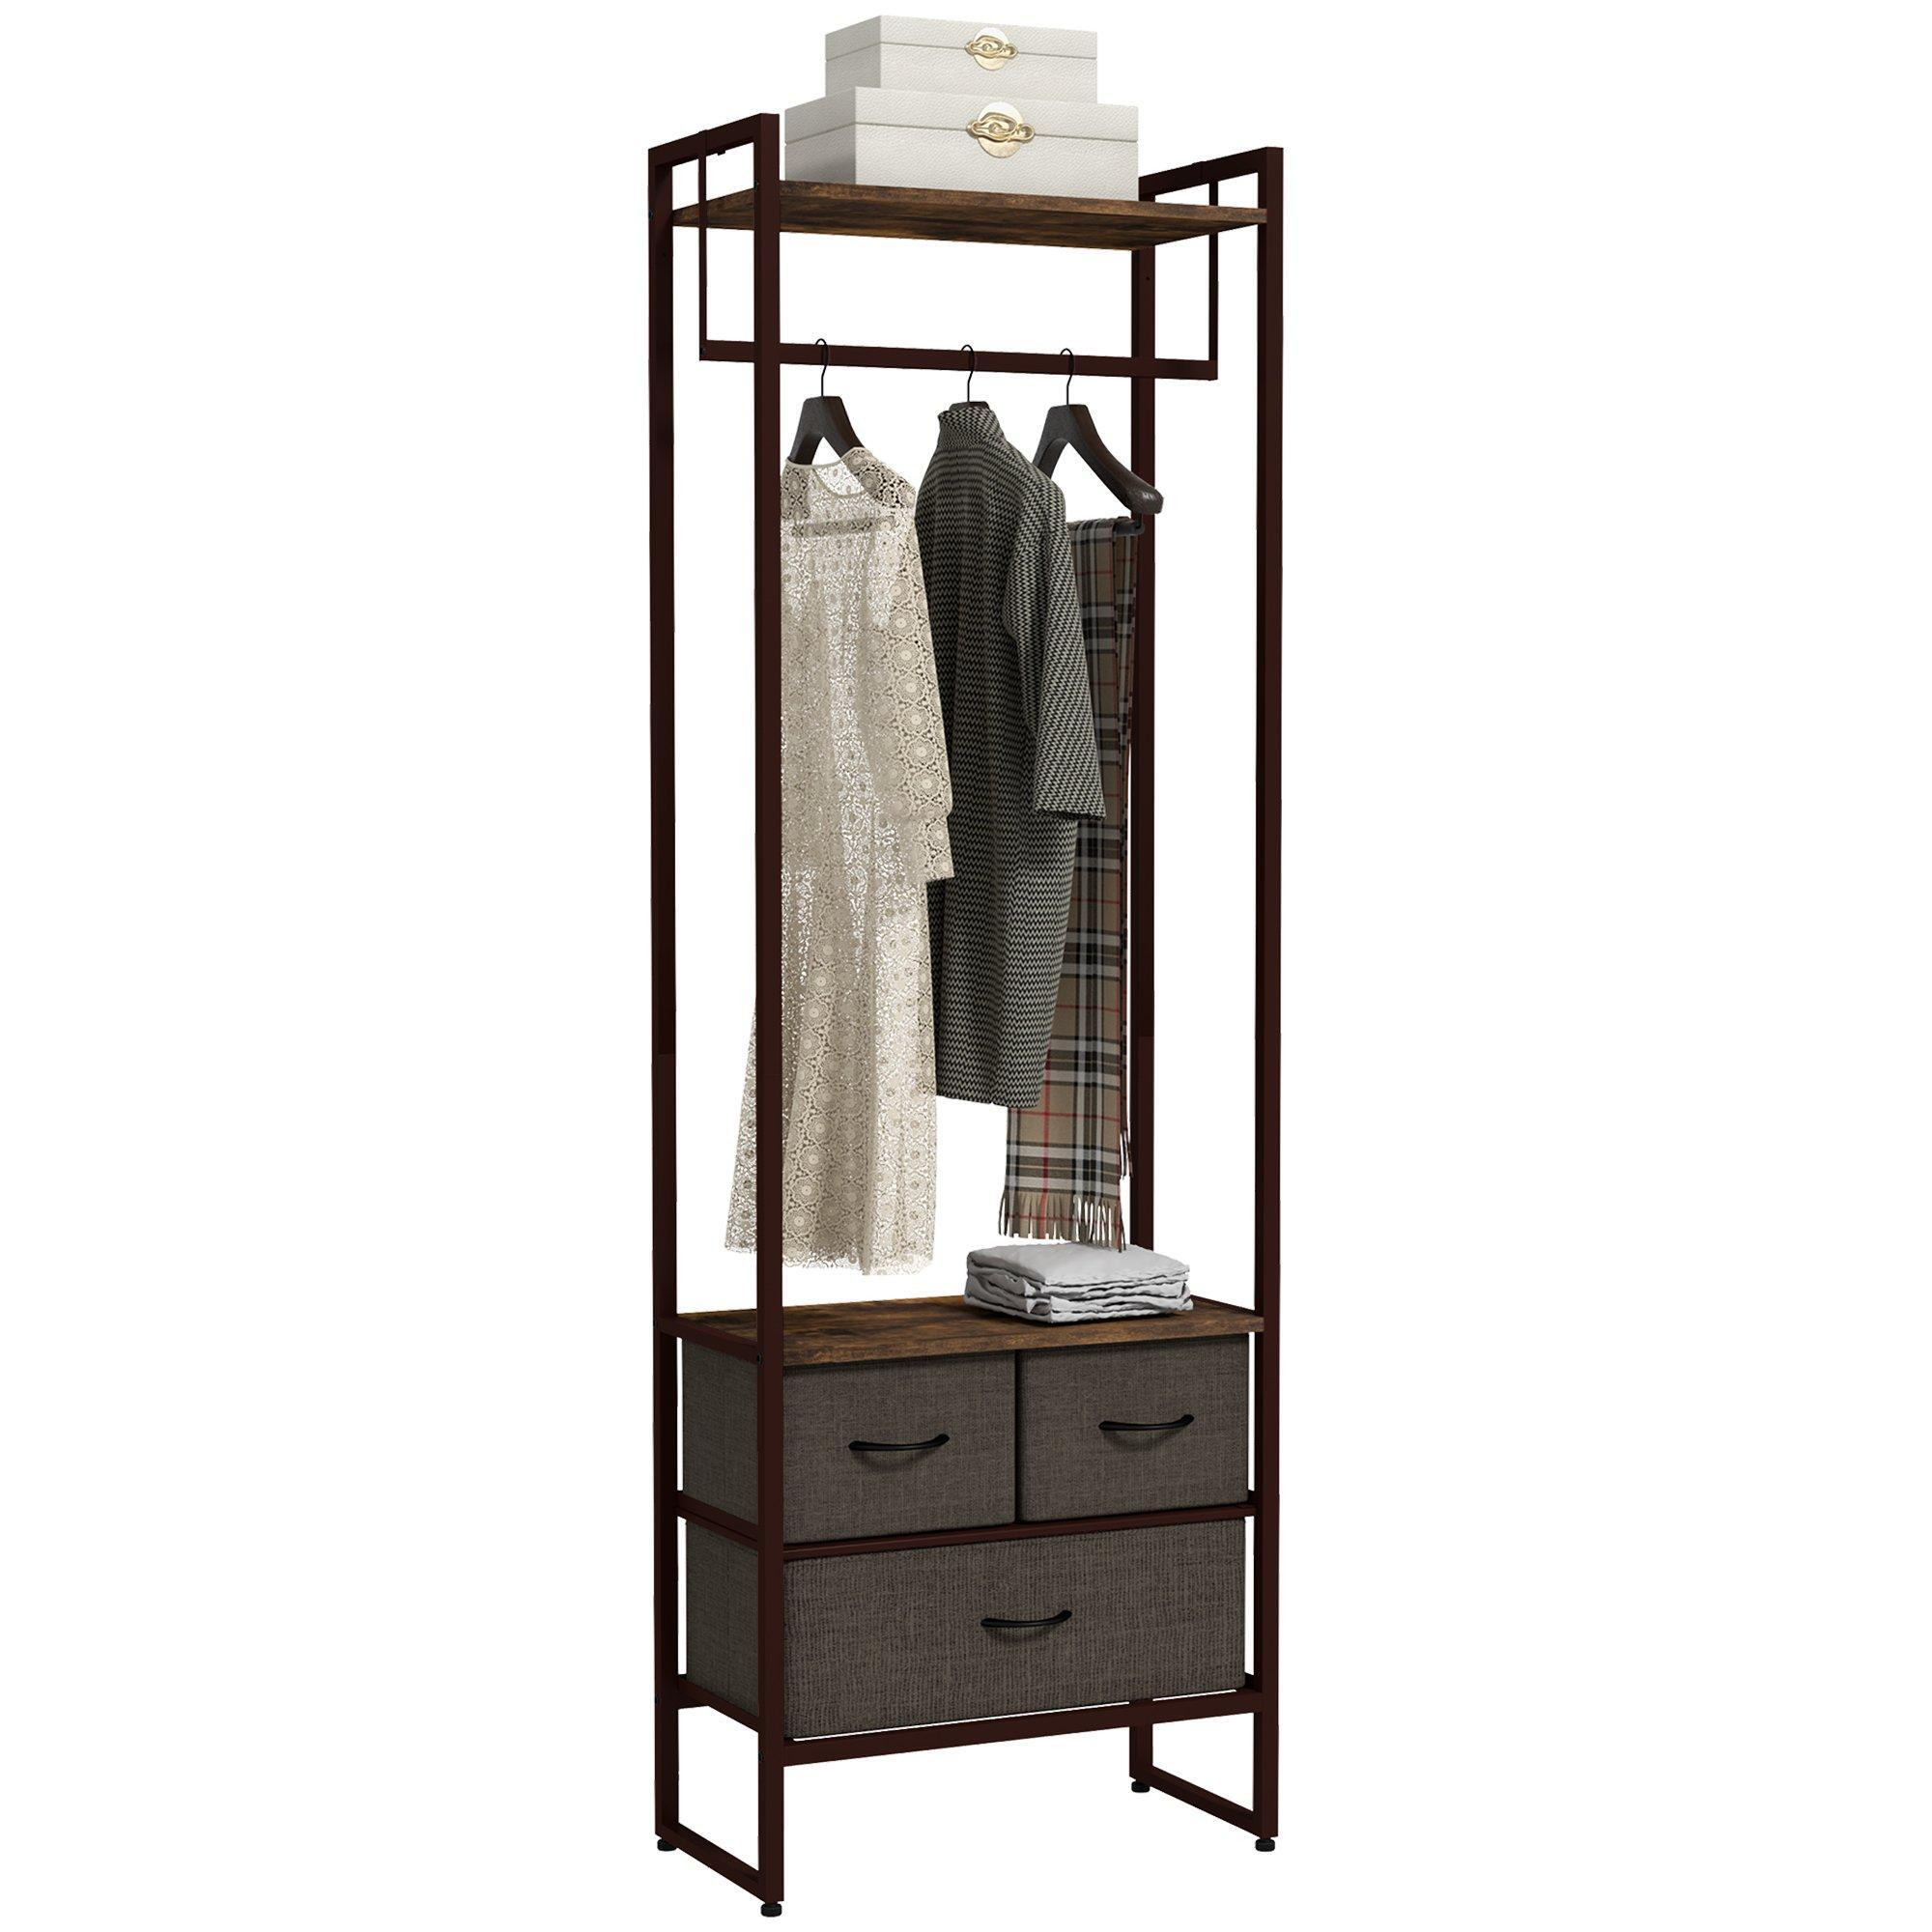 Free Standing Clothes Rail Garment Rack with 3 Fabric Drawers - image 1